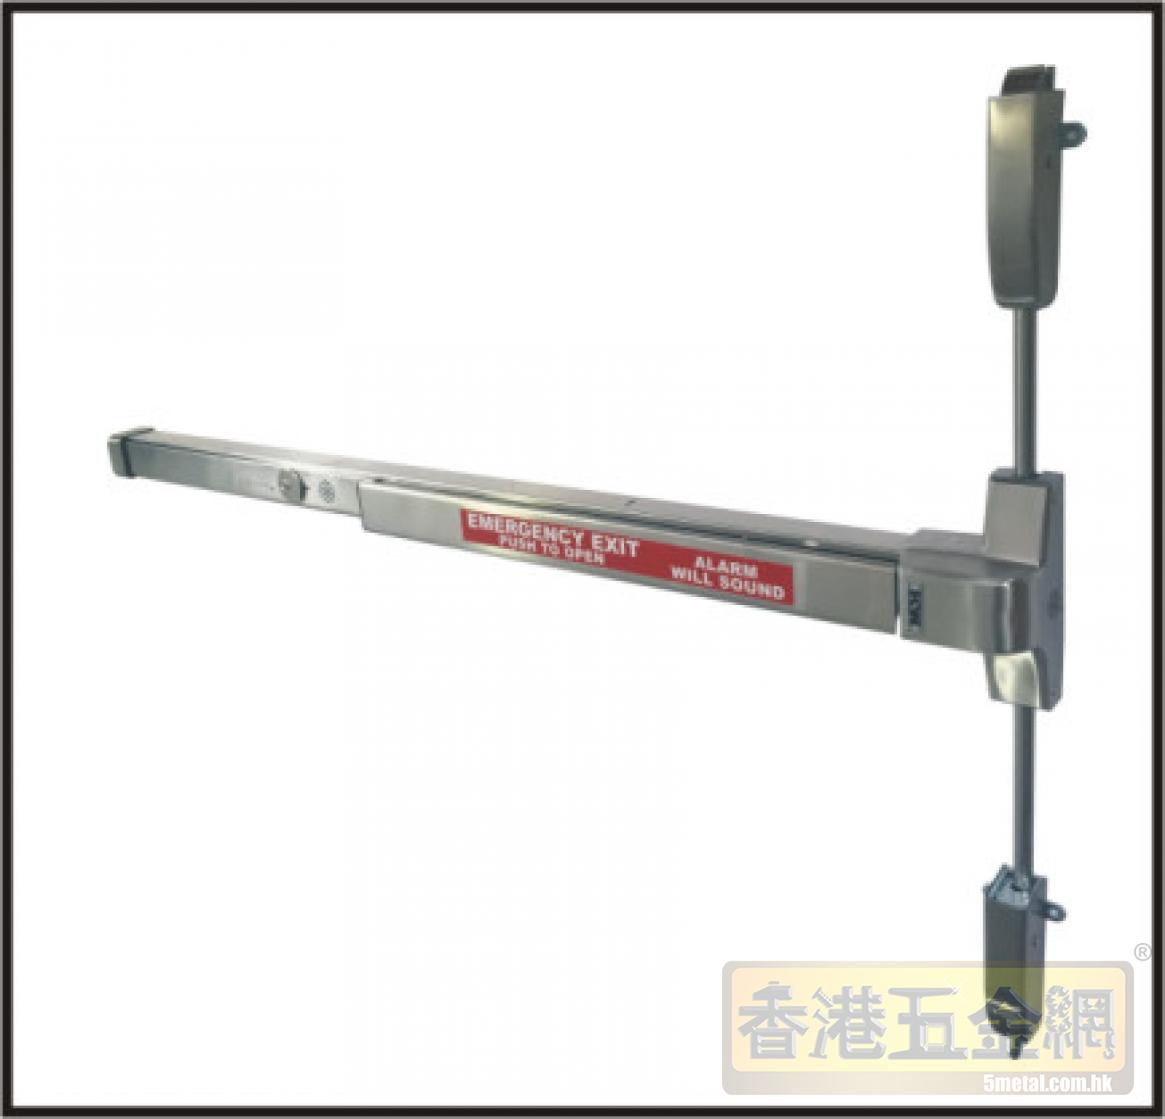 Panic Exit Device (Vertical Rod Function With Alarm) - KW 500SS-02-A 消防門鎖 緊急出口裝置